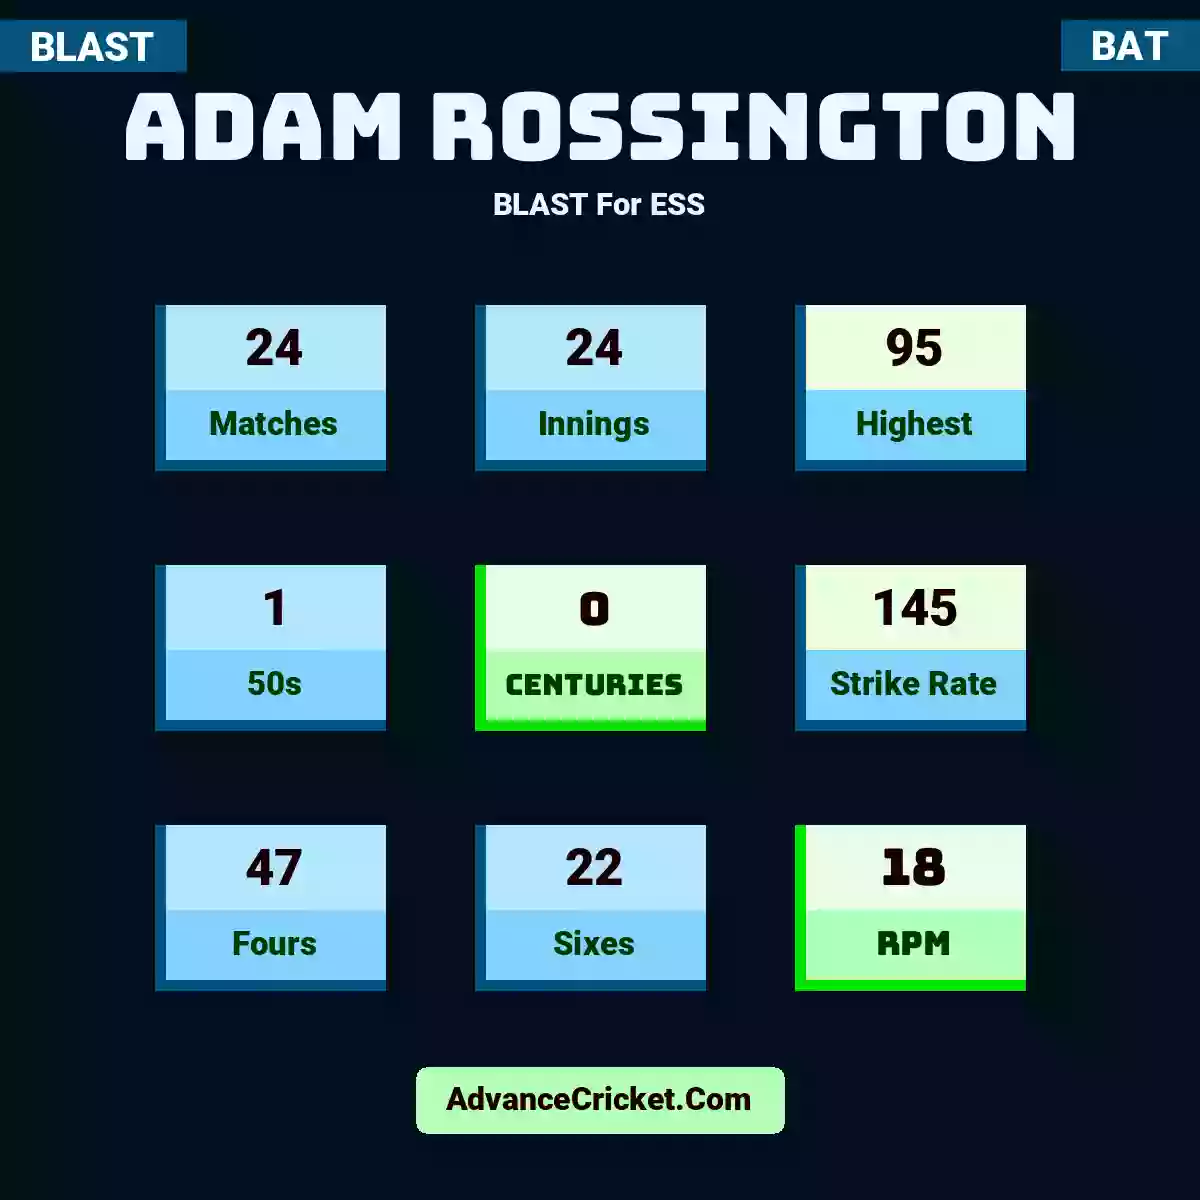 Adam Rossington BLAST  For ESS, Adam Rossington played 24 matches, scored 95 runs as highest, 1 half-centuries, and 0 centuries, with a strike rate of 145. A.Rossington hit 47 fours and 22 sixes, with an RPM of 18.